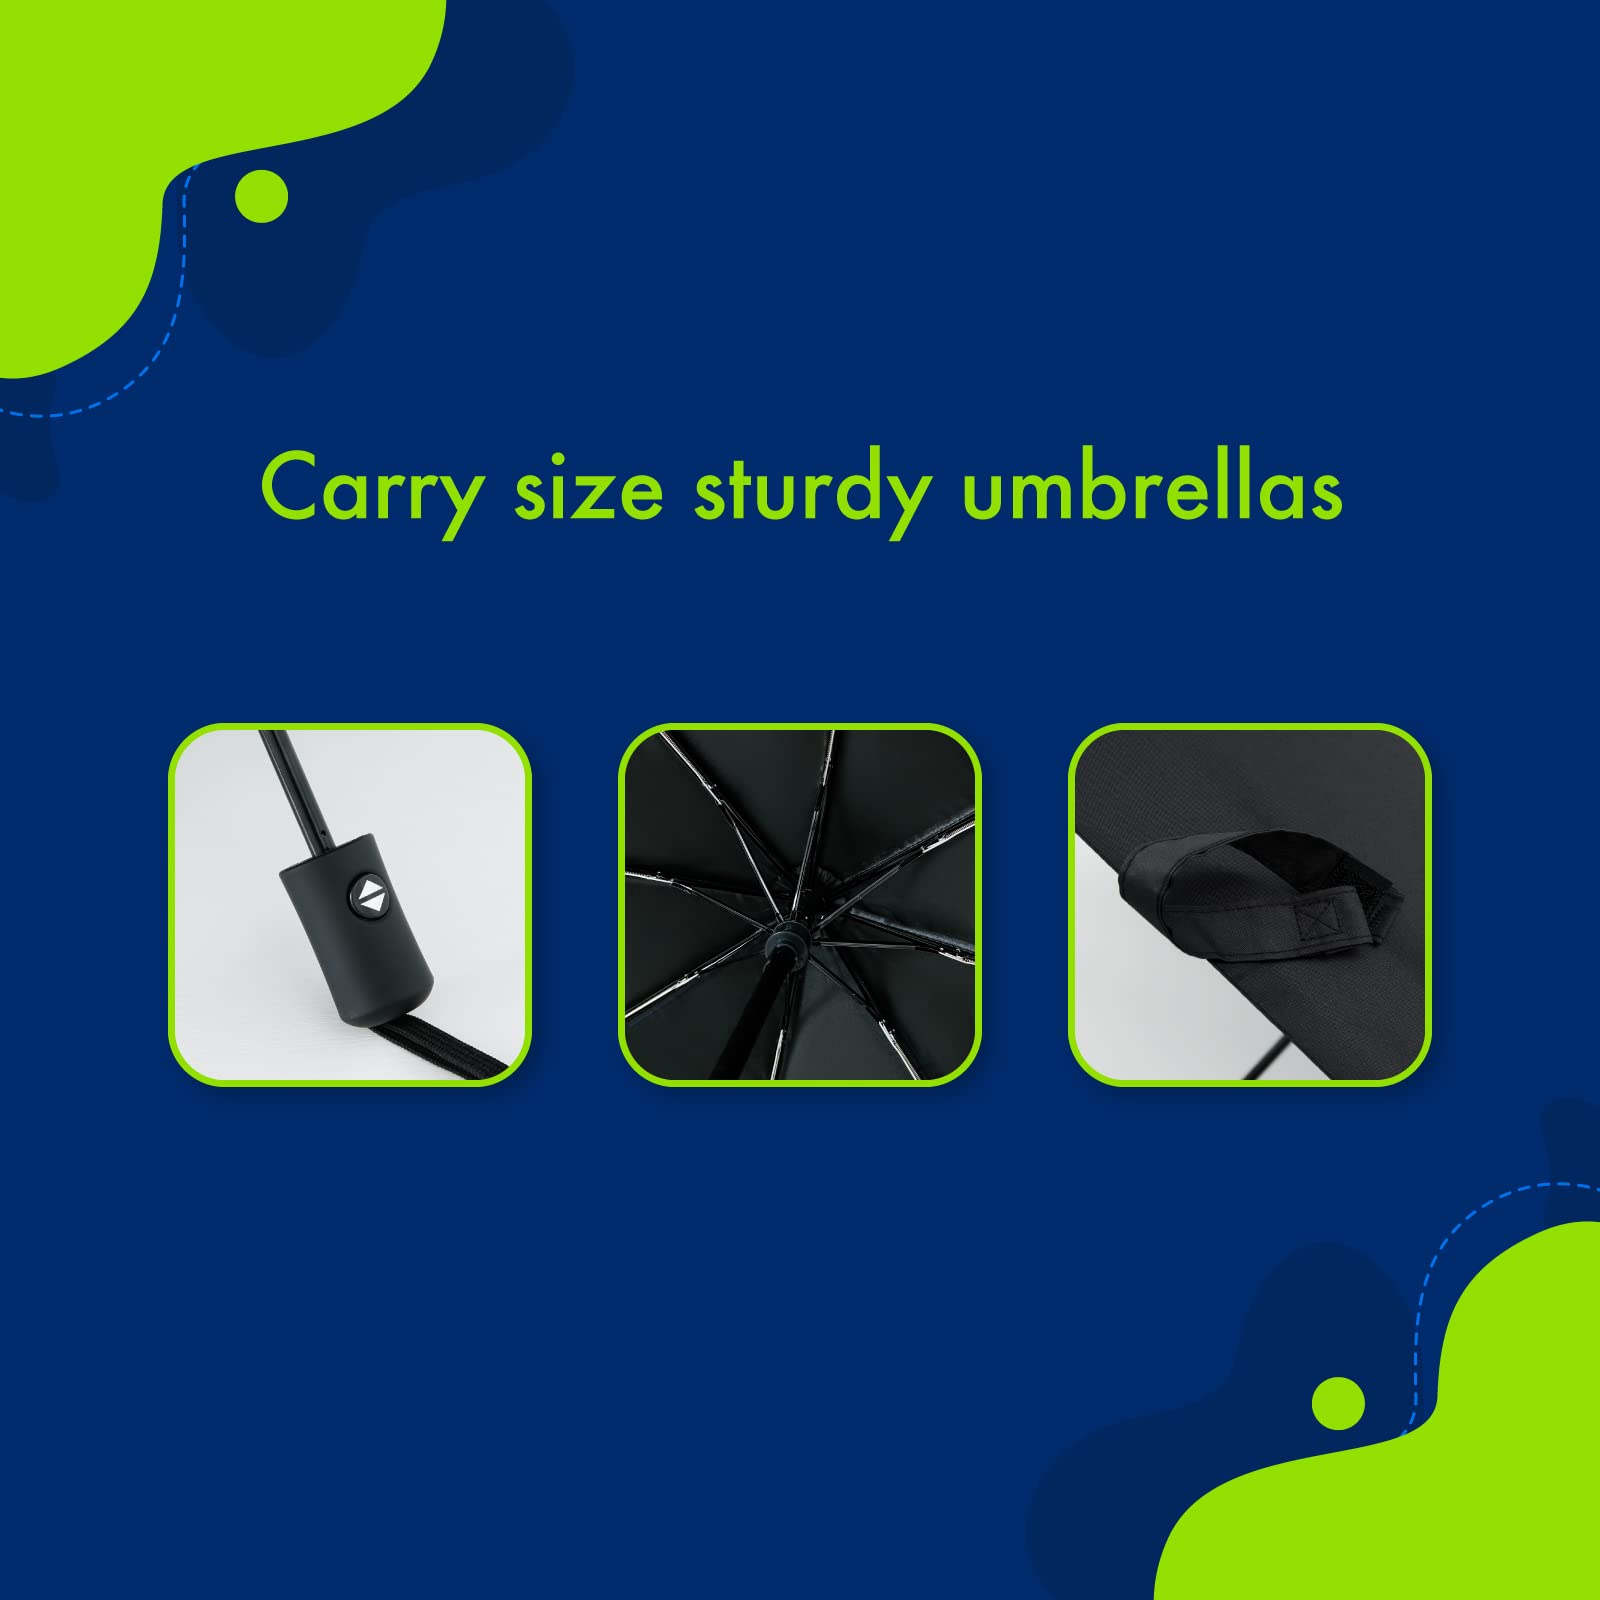 ABSORBIA Unisex 3X Folding Umbrella Navy Blue and Black(Pack of 2),For Rain & Sun Protection and also windproof | Double Layer Folding Portable Umbrella with Cover